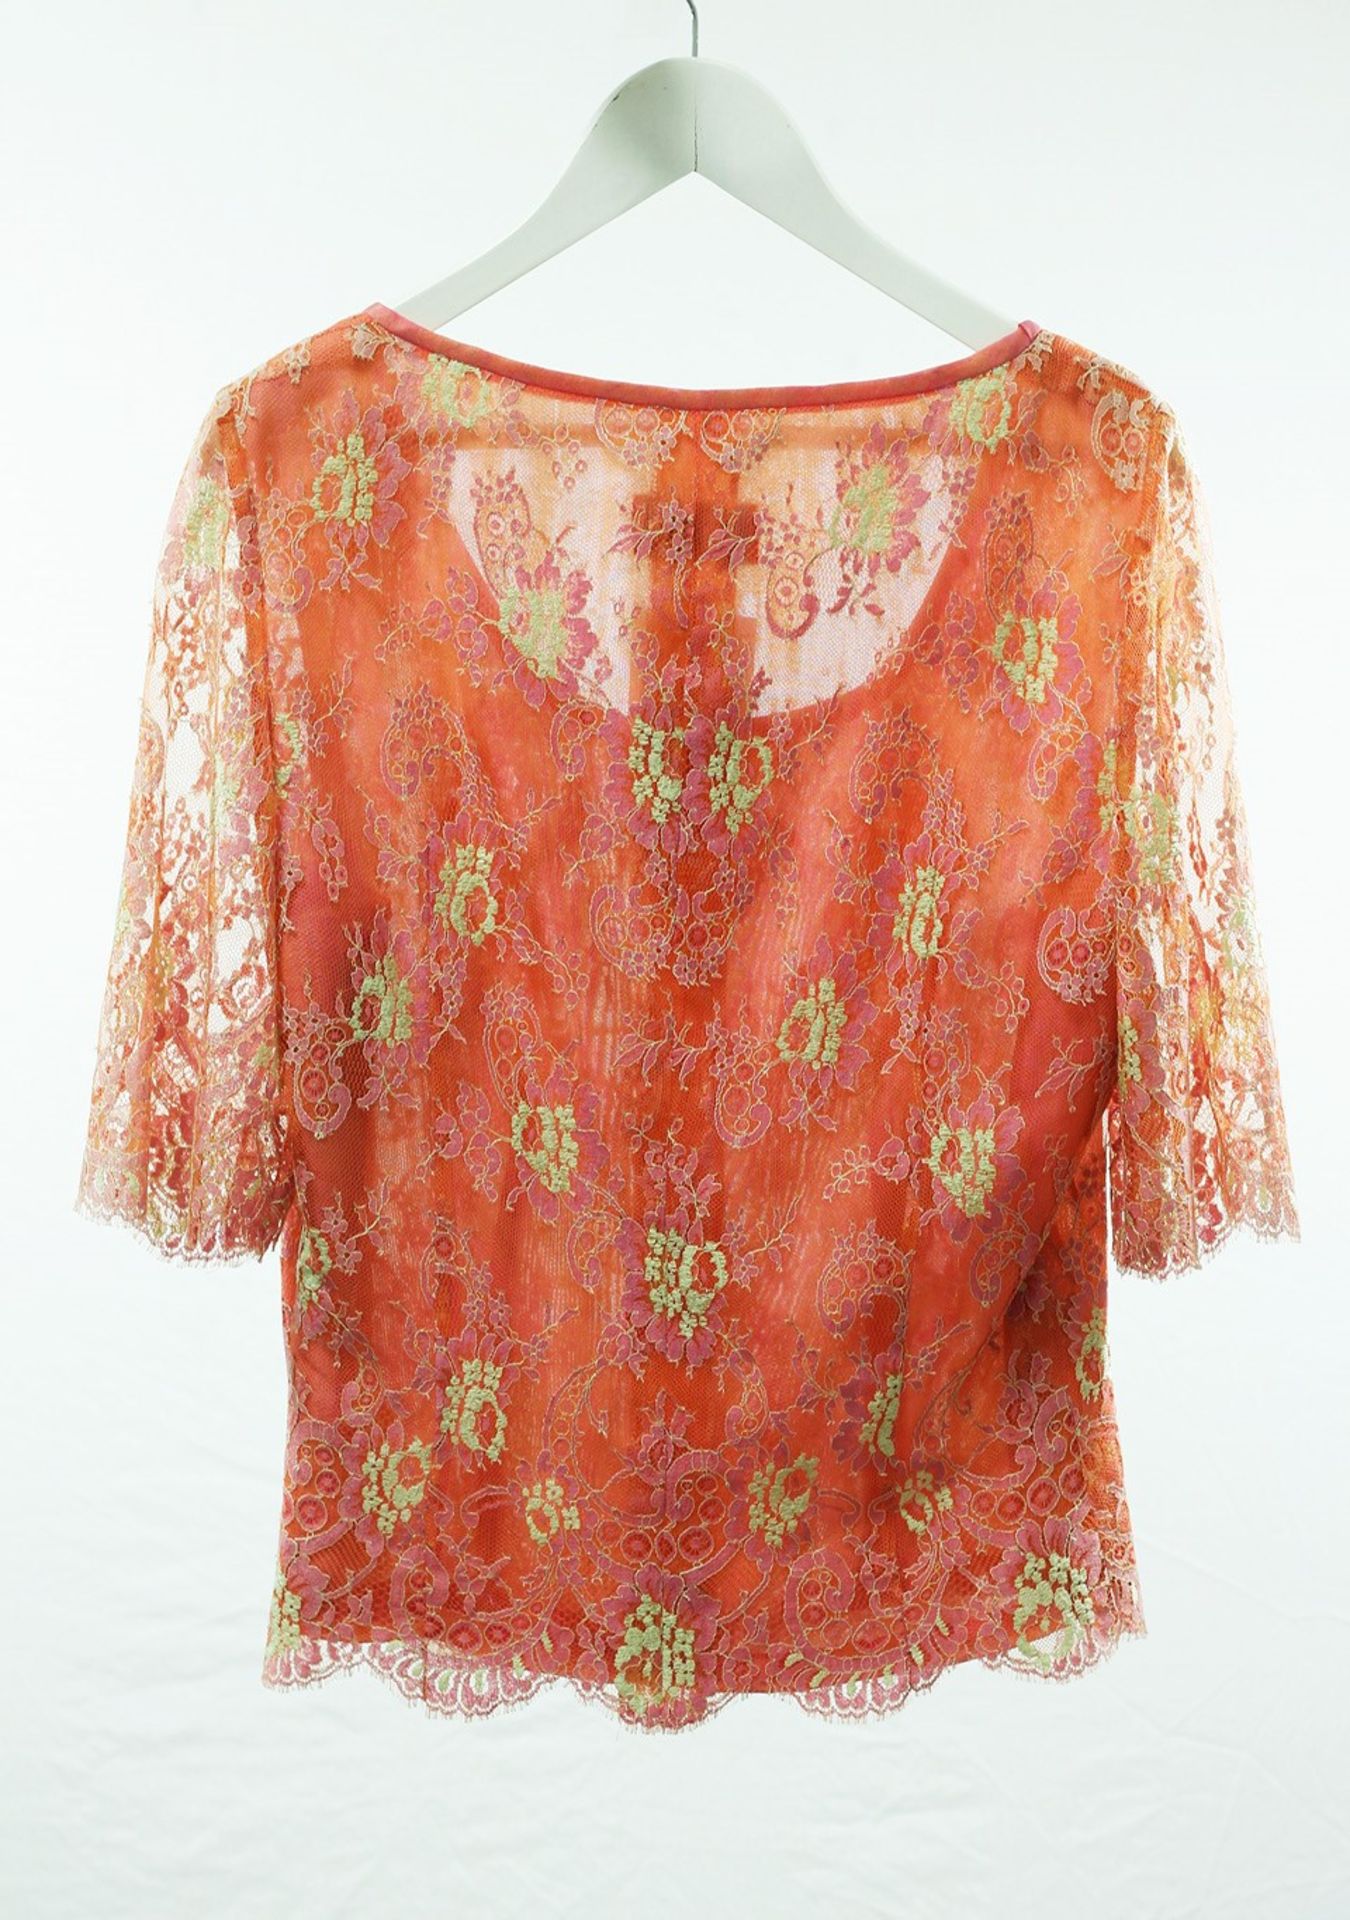 1 x Anne Belin Pink Top - Size: 18 - Material: 50% Cotton, 50% Polyester - From a High End - Image 6 of 7